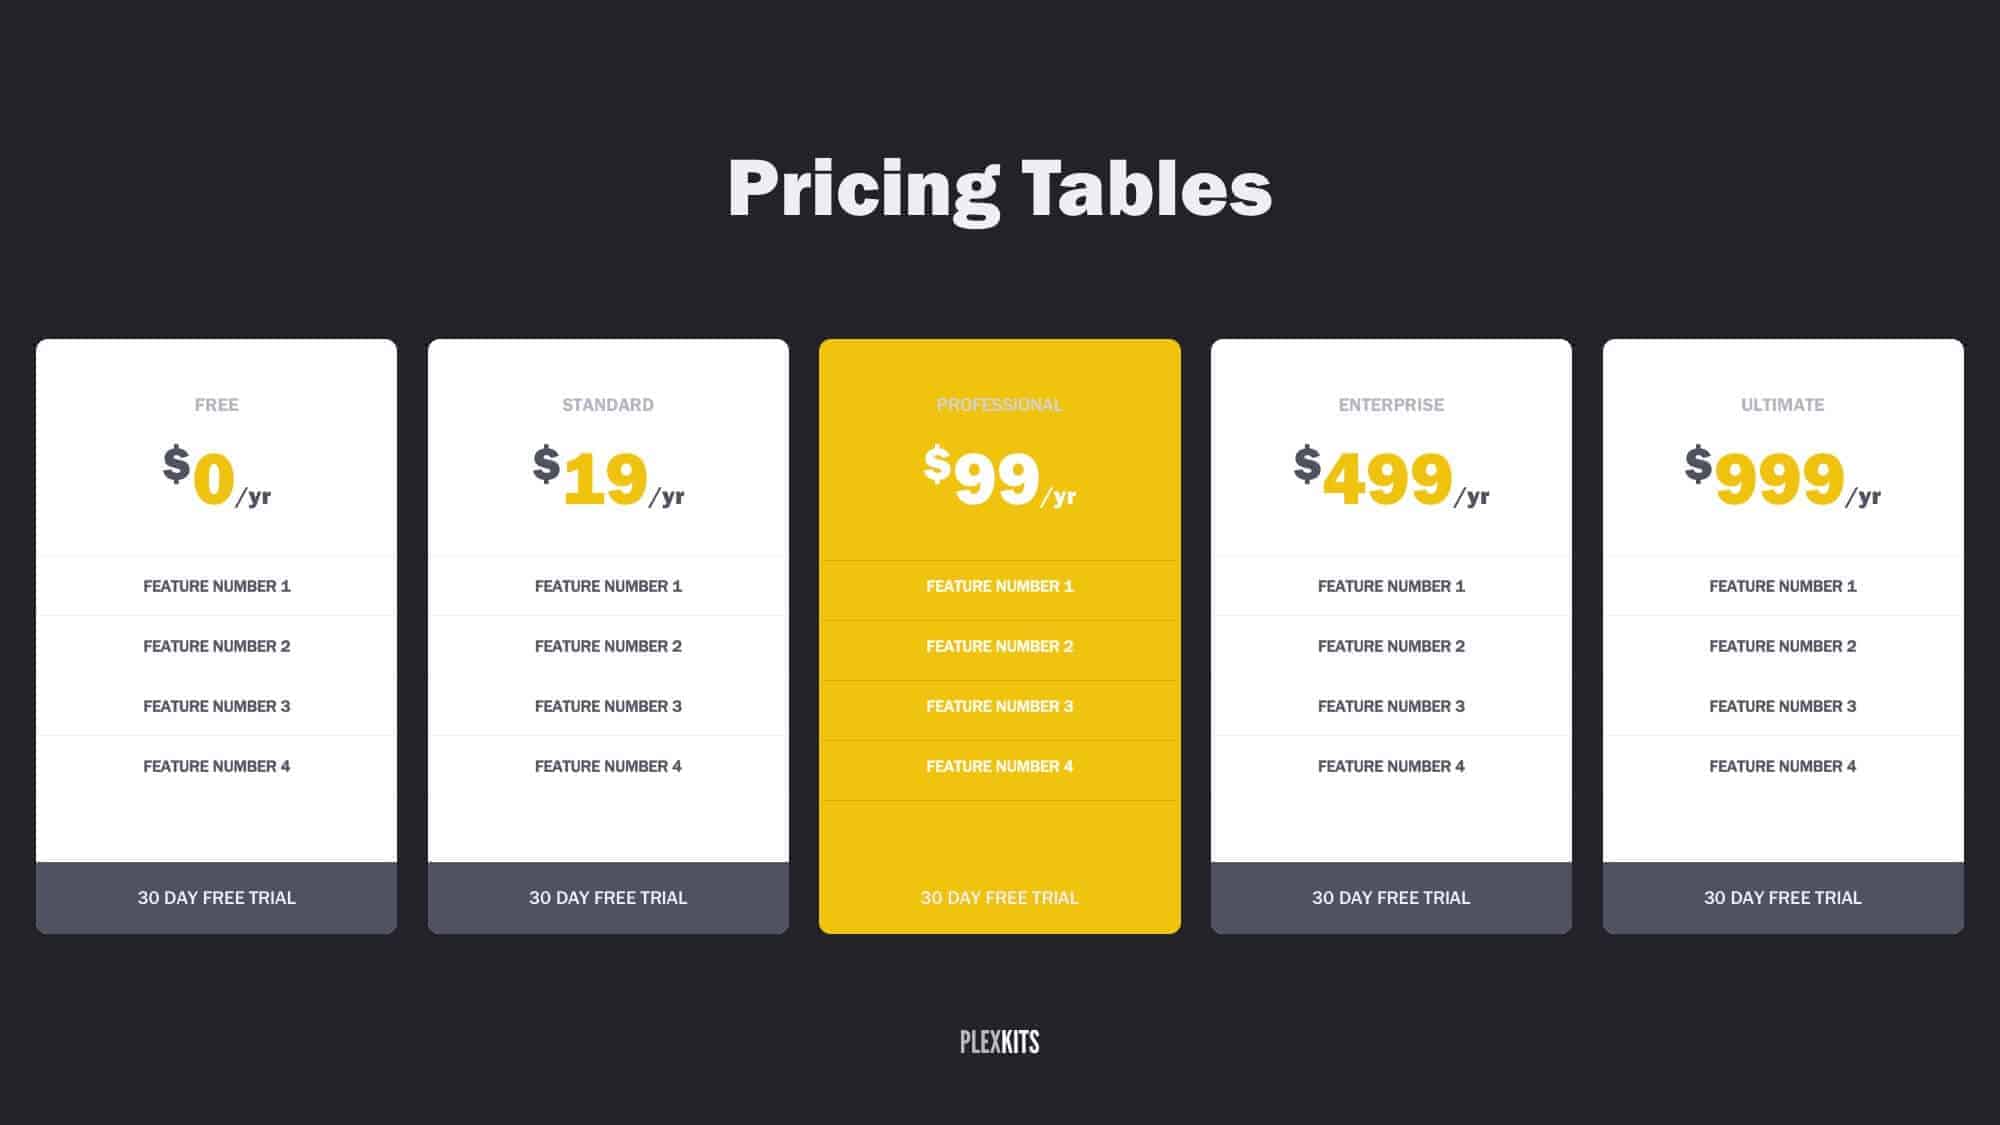 Free PowerPoint Pricing Table Slide Templates (New For 2020)